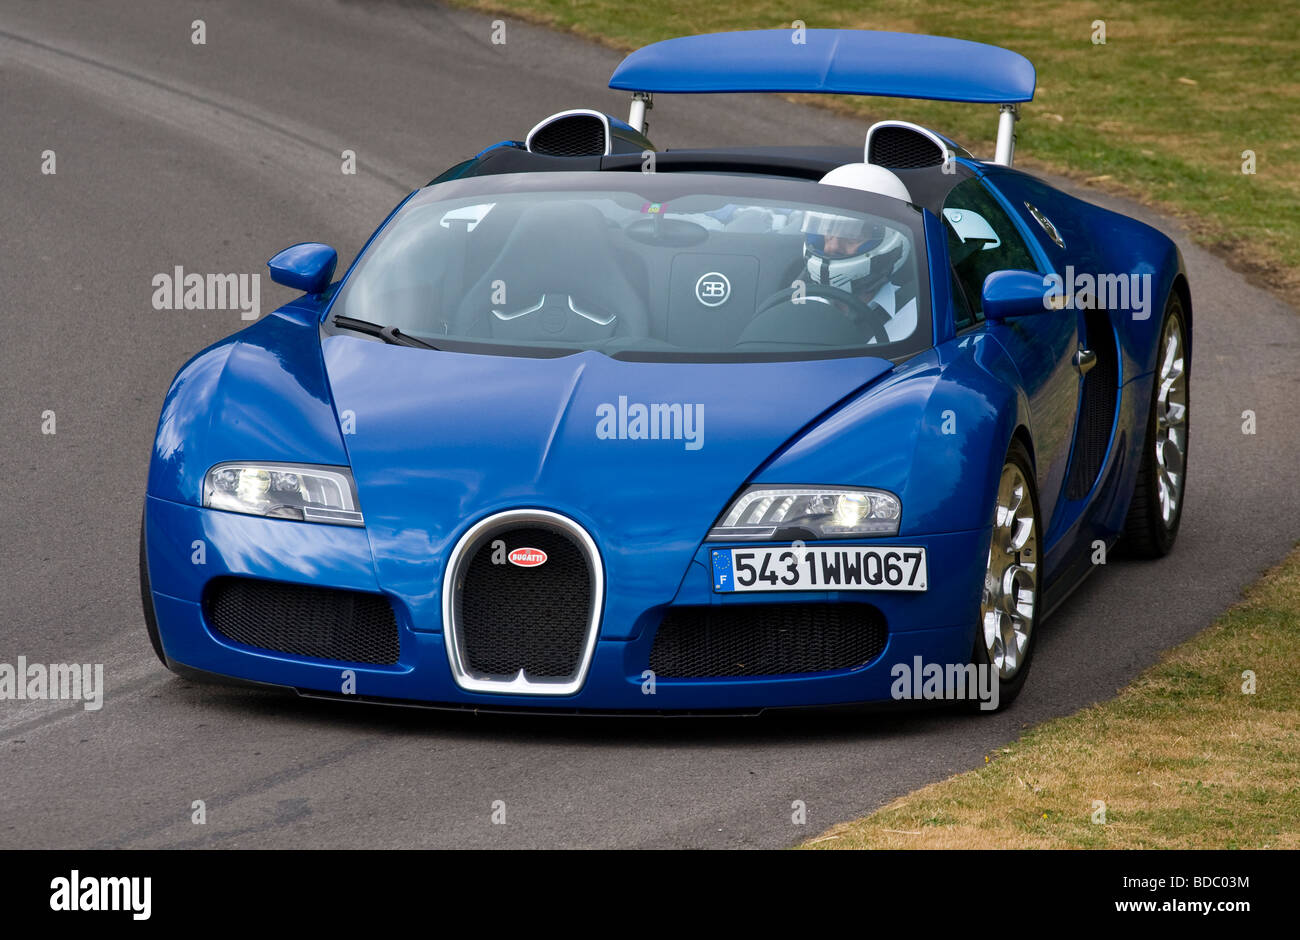 2009 Bugatti Veyron EB 16.4 Grand Sport at the Goodwood Festival of Speed, Sussex, UK. Stock Photo